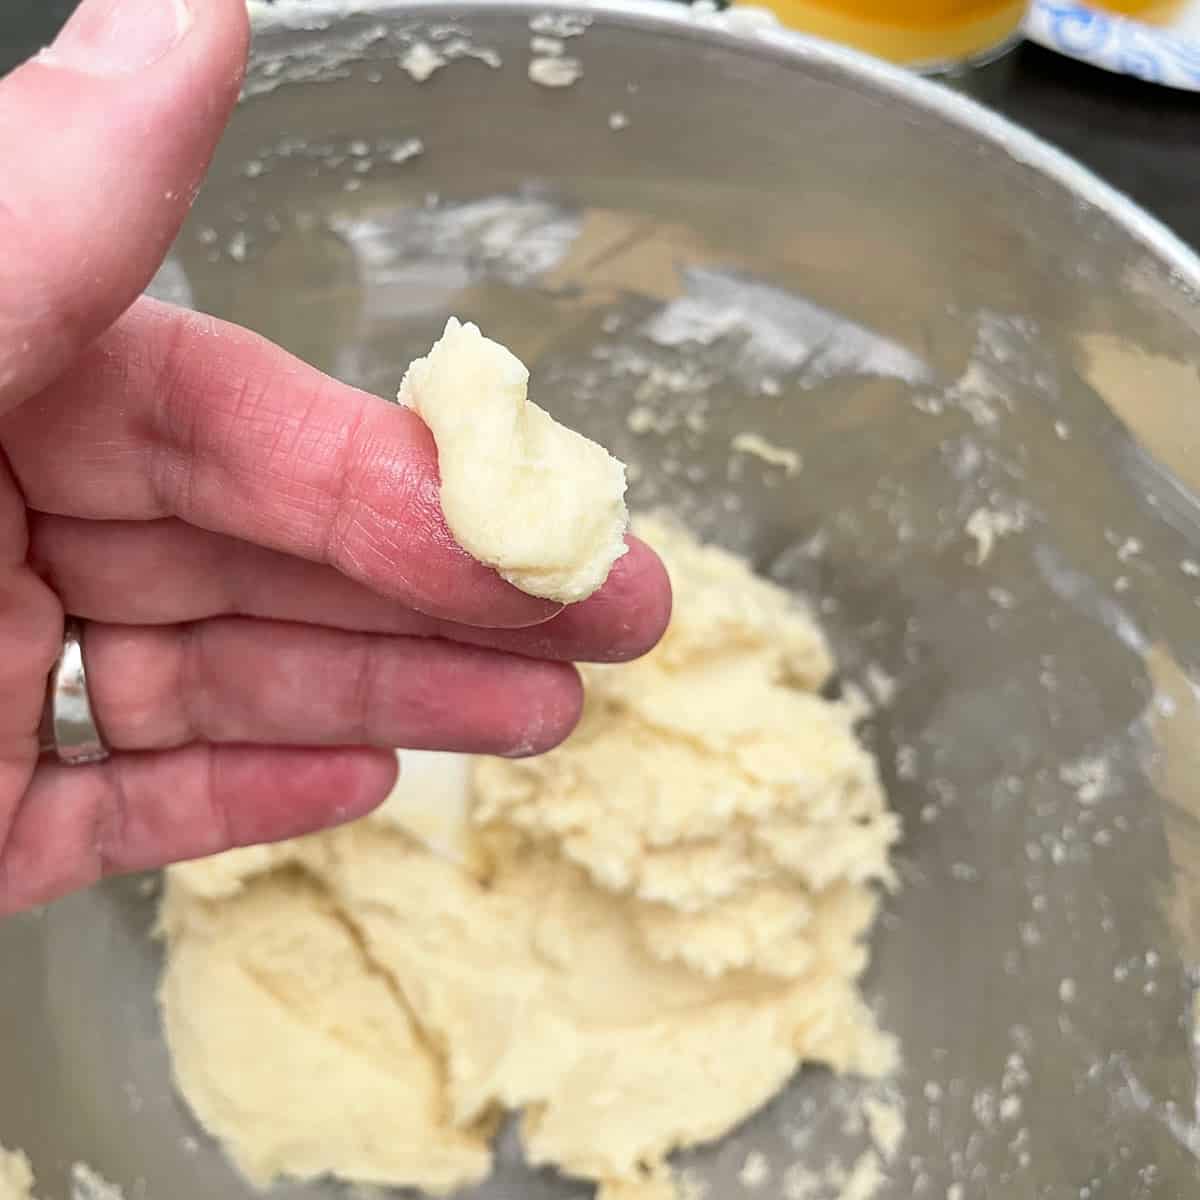 How the cookie dough should look if put between your fingers after the flour has been added.